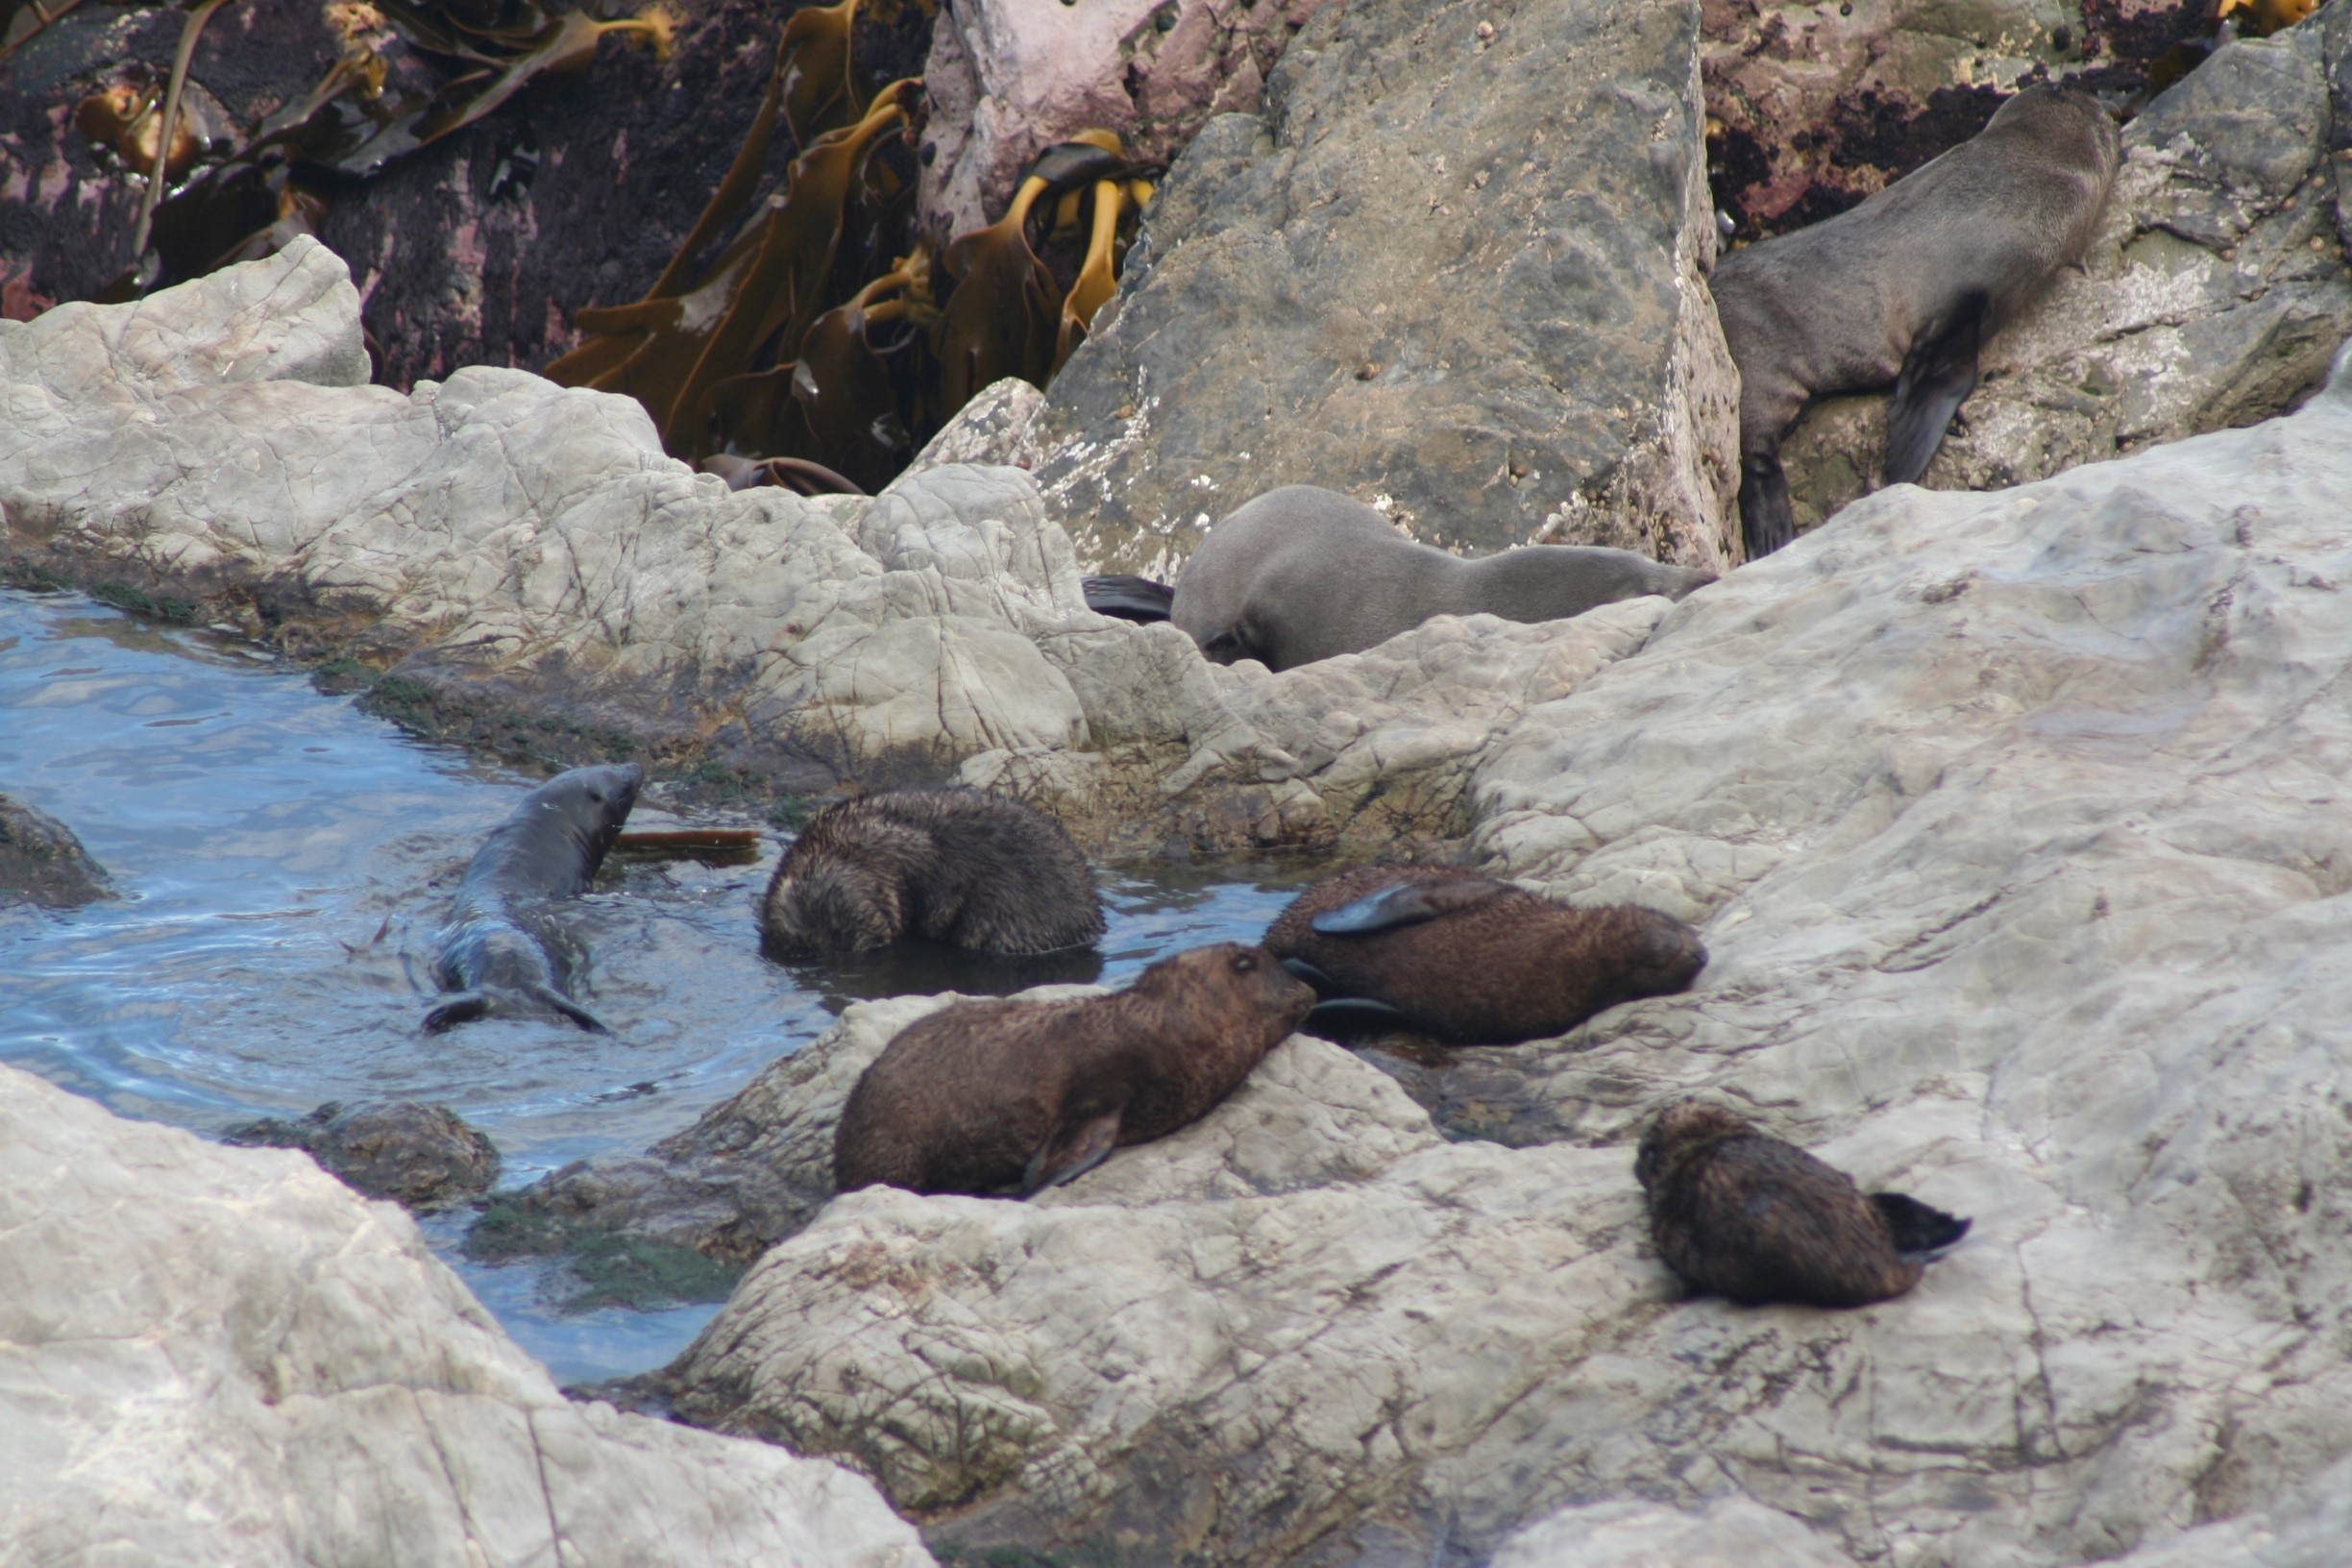 Just north of Kaikoura is Ohau point, where you can find baby seals frolicking on the rocks and in the water